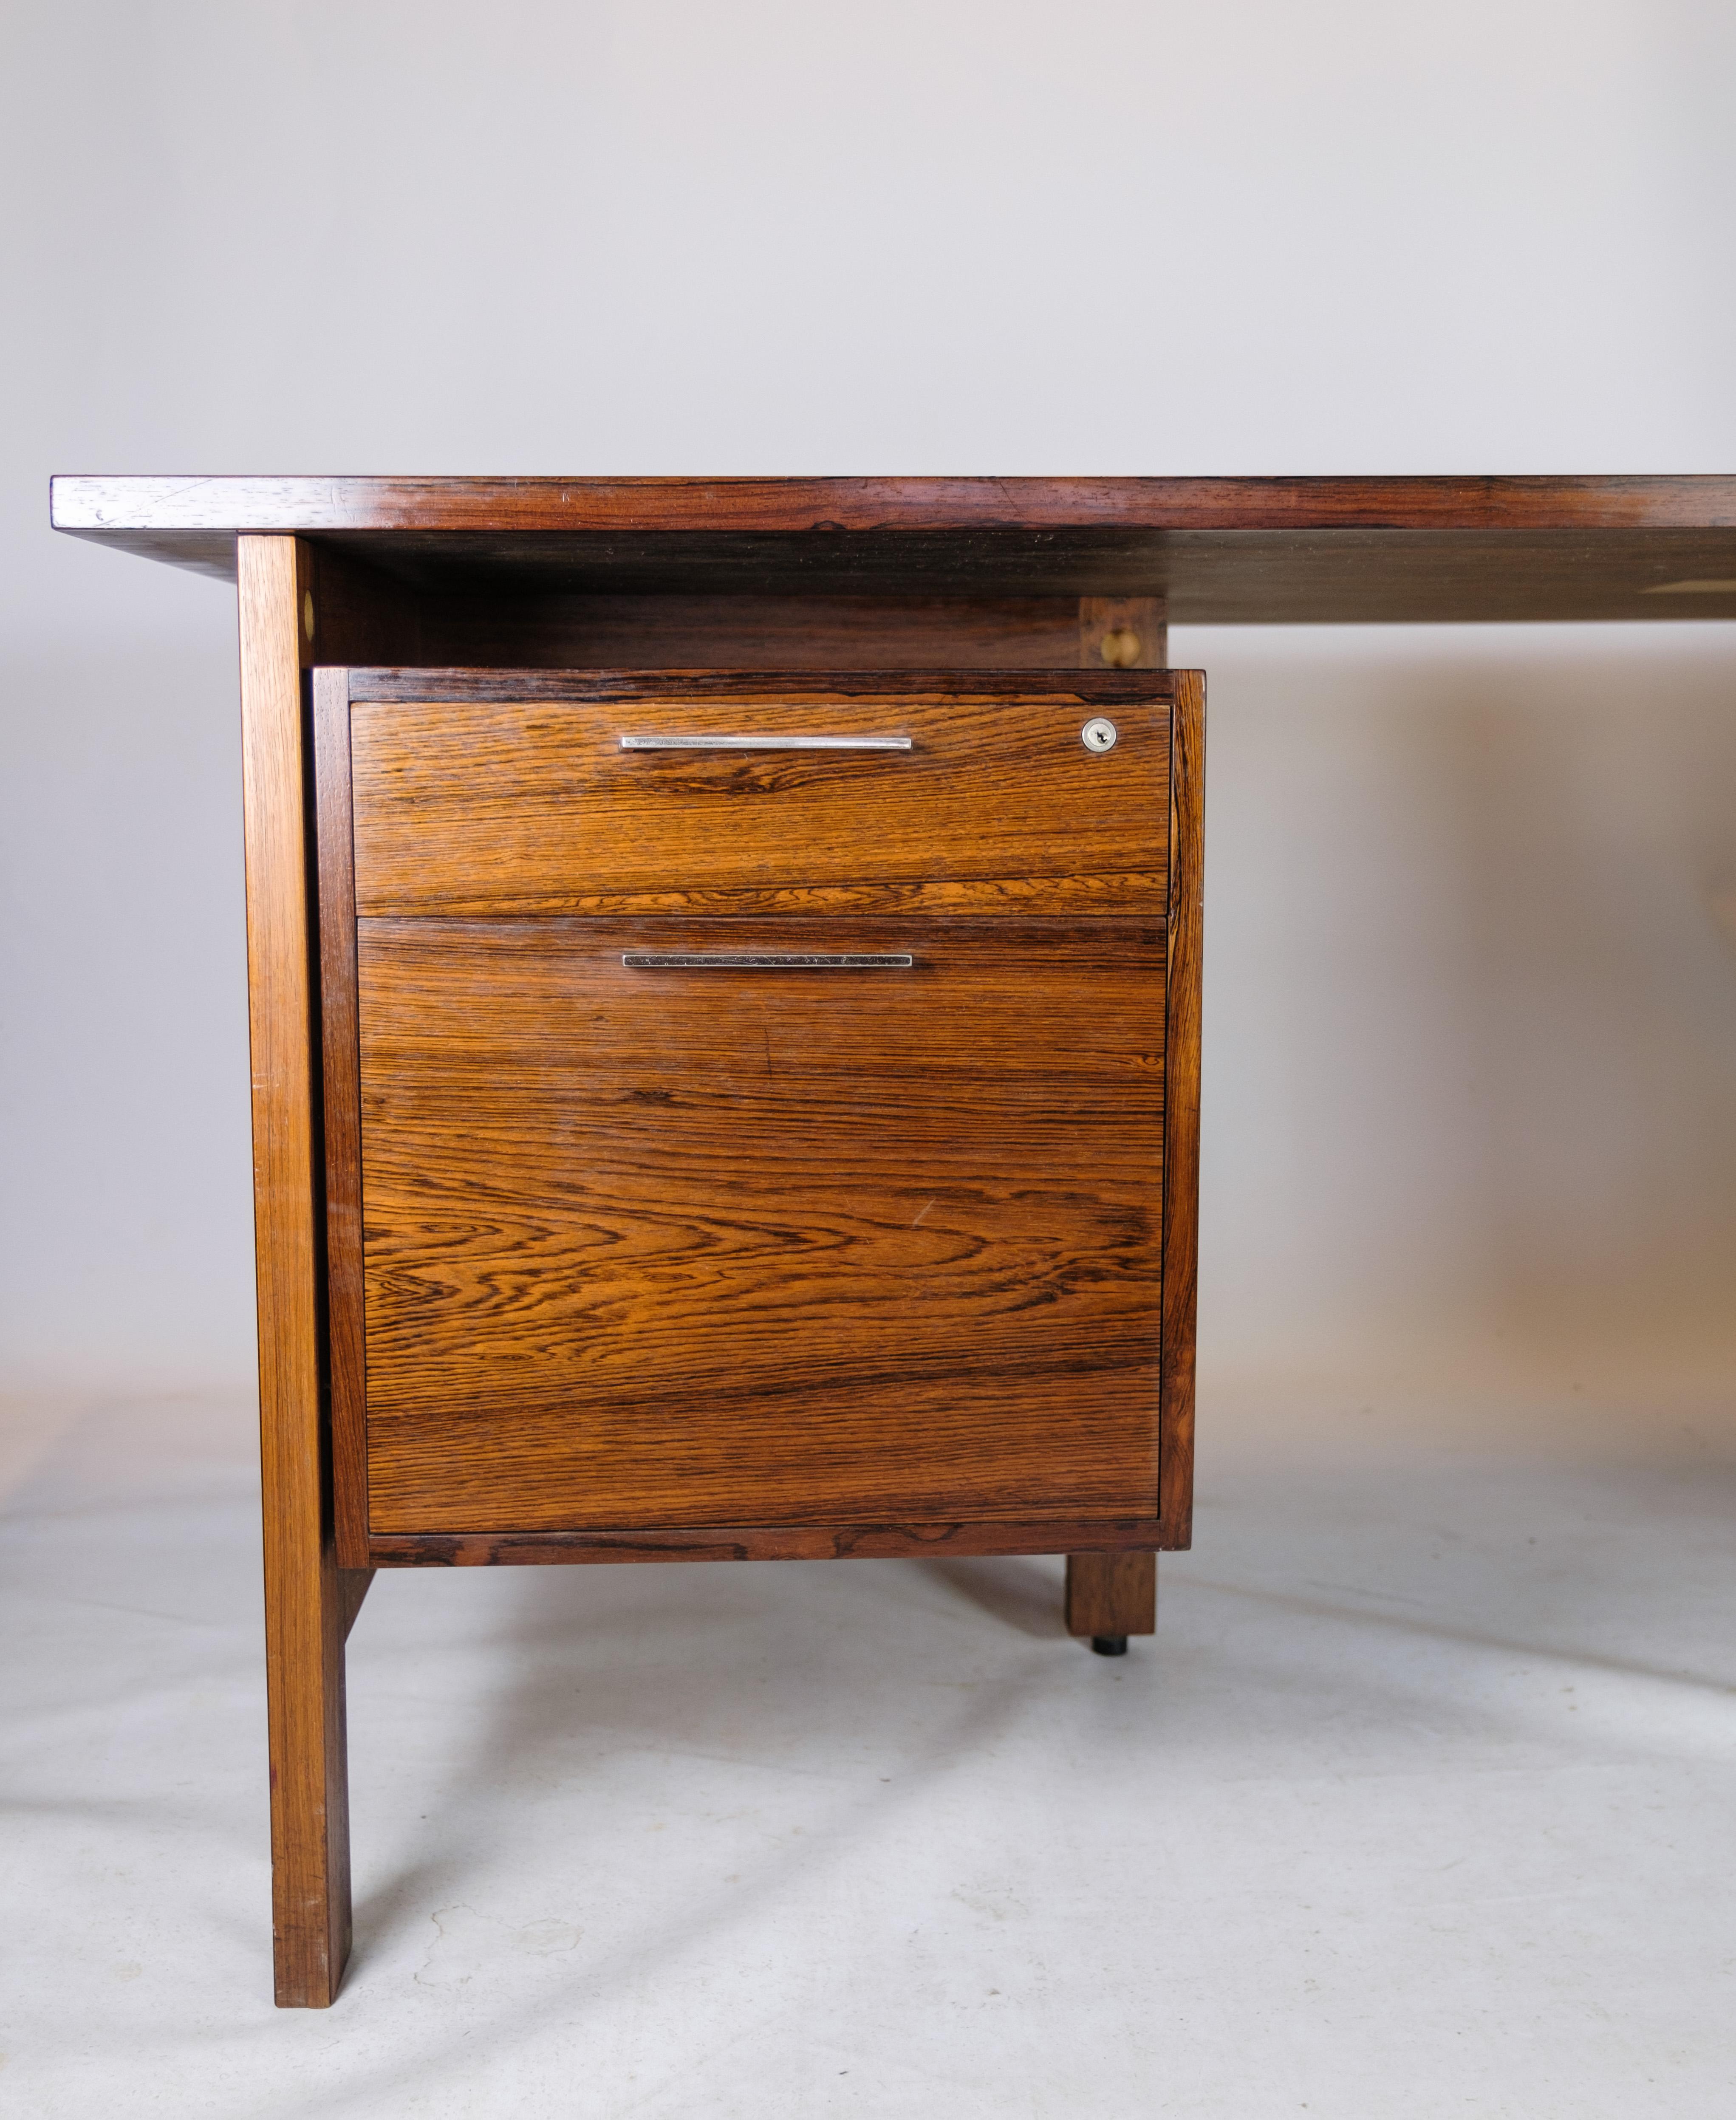 Freestanding Desk Of Danish Design In Rosewood By Bjerringbro Furniture In Excellent Condition For Sale In Lejre, DK